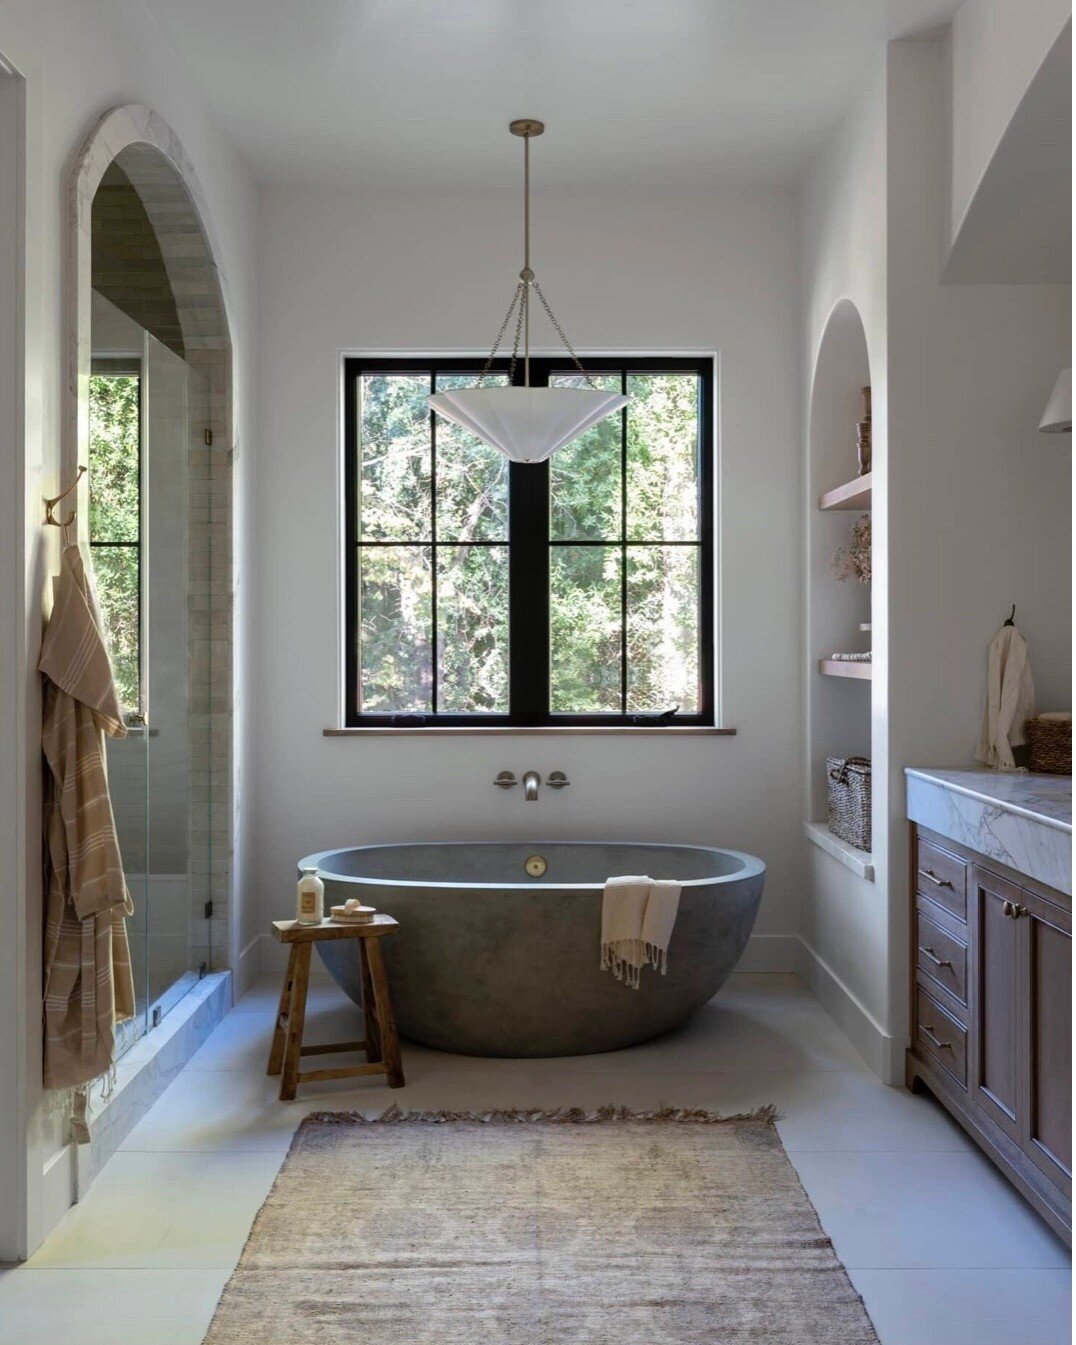 Stepping into a sanctuary for relaxation with this beautiful concrete tub. The bathtub creates a show-stopping focal point, crafted from sustainable materials and available in various finishes.

Swipe to discover more.